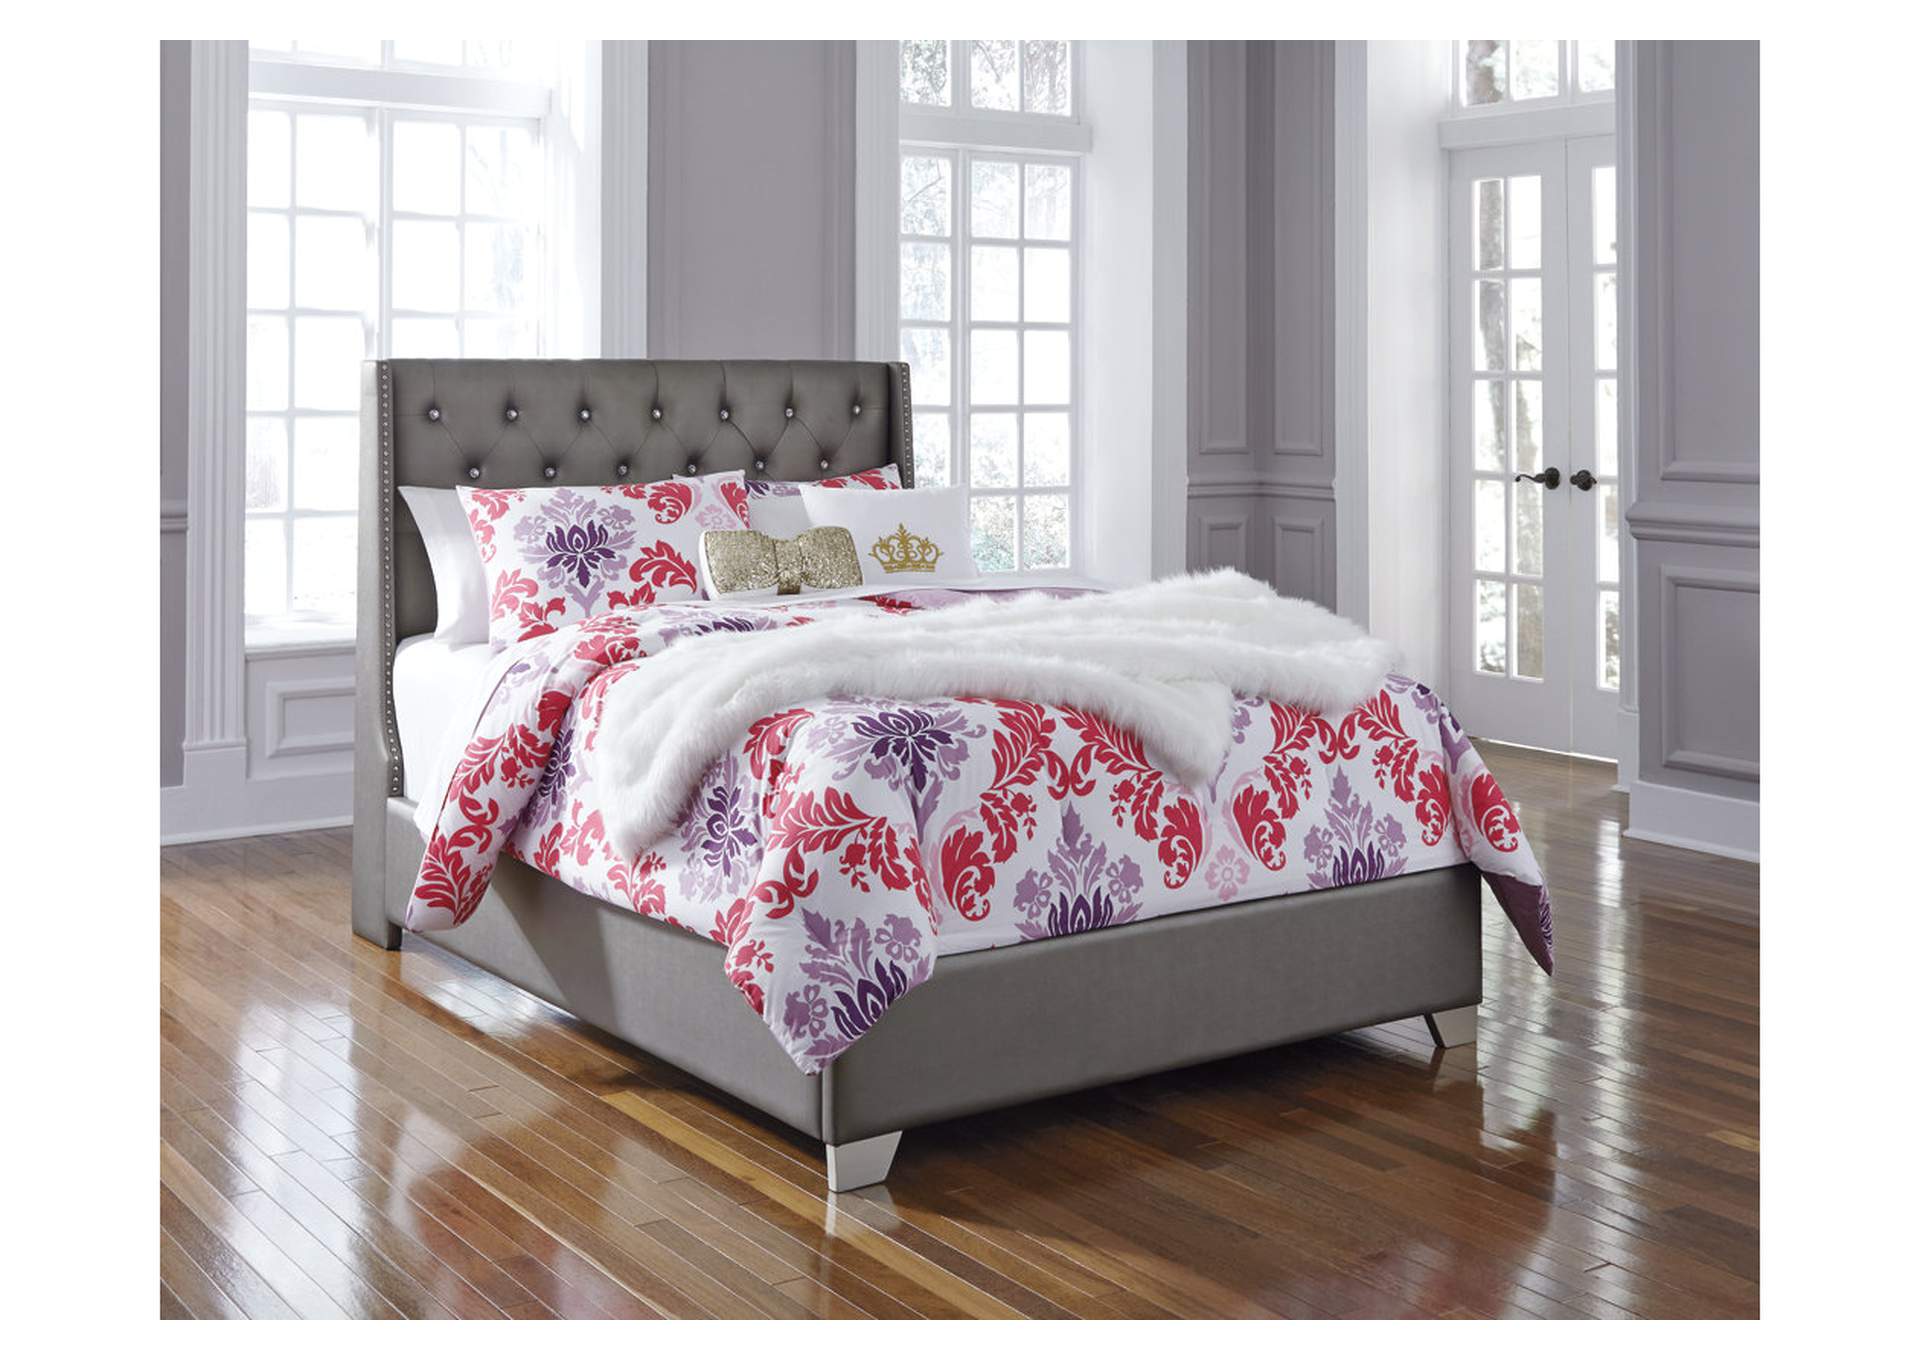 Coralayne Full Upholstered Bed,Signature Design By Ashley